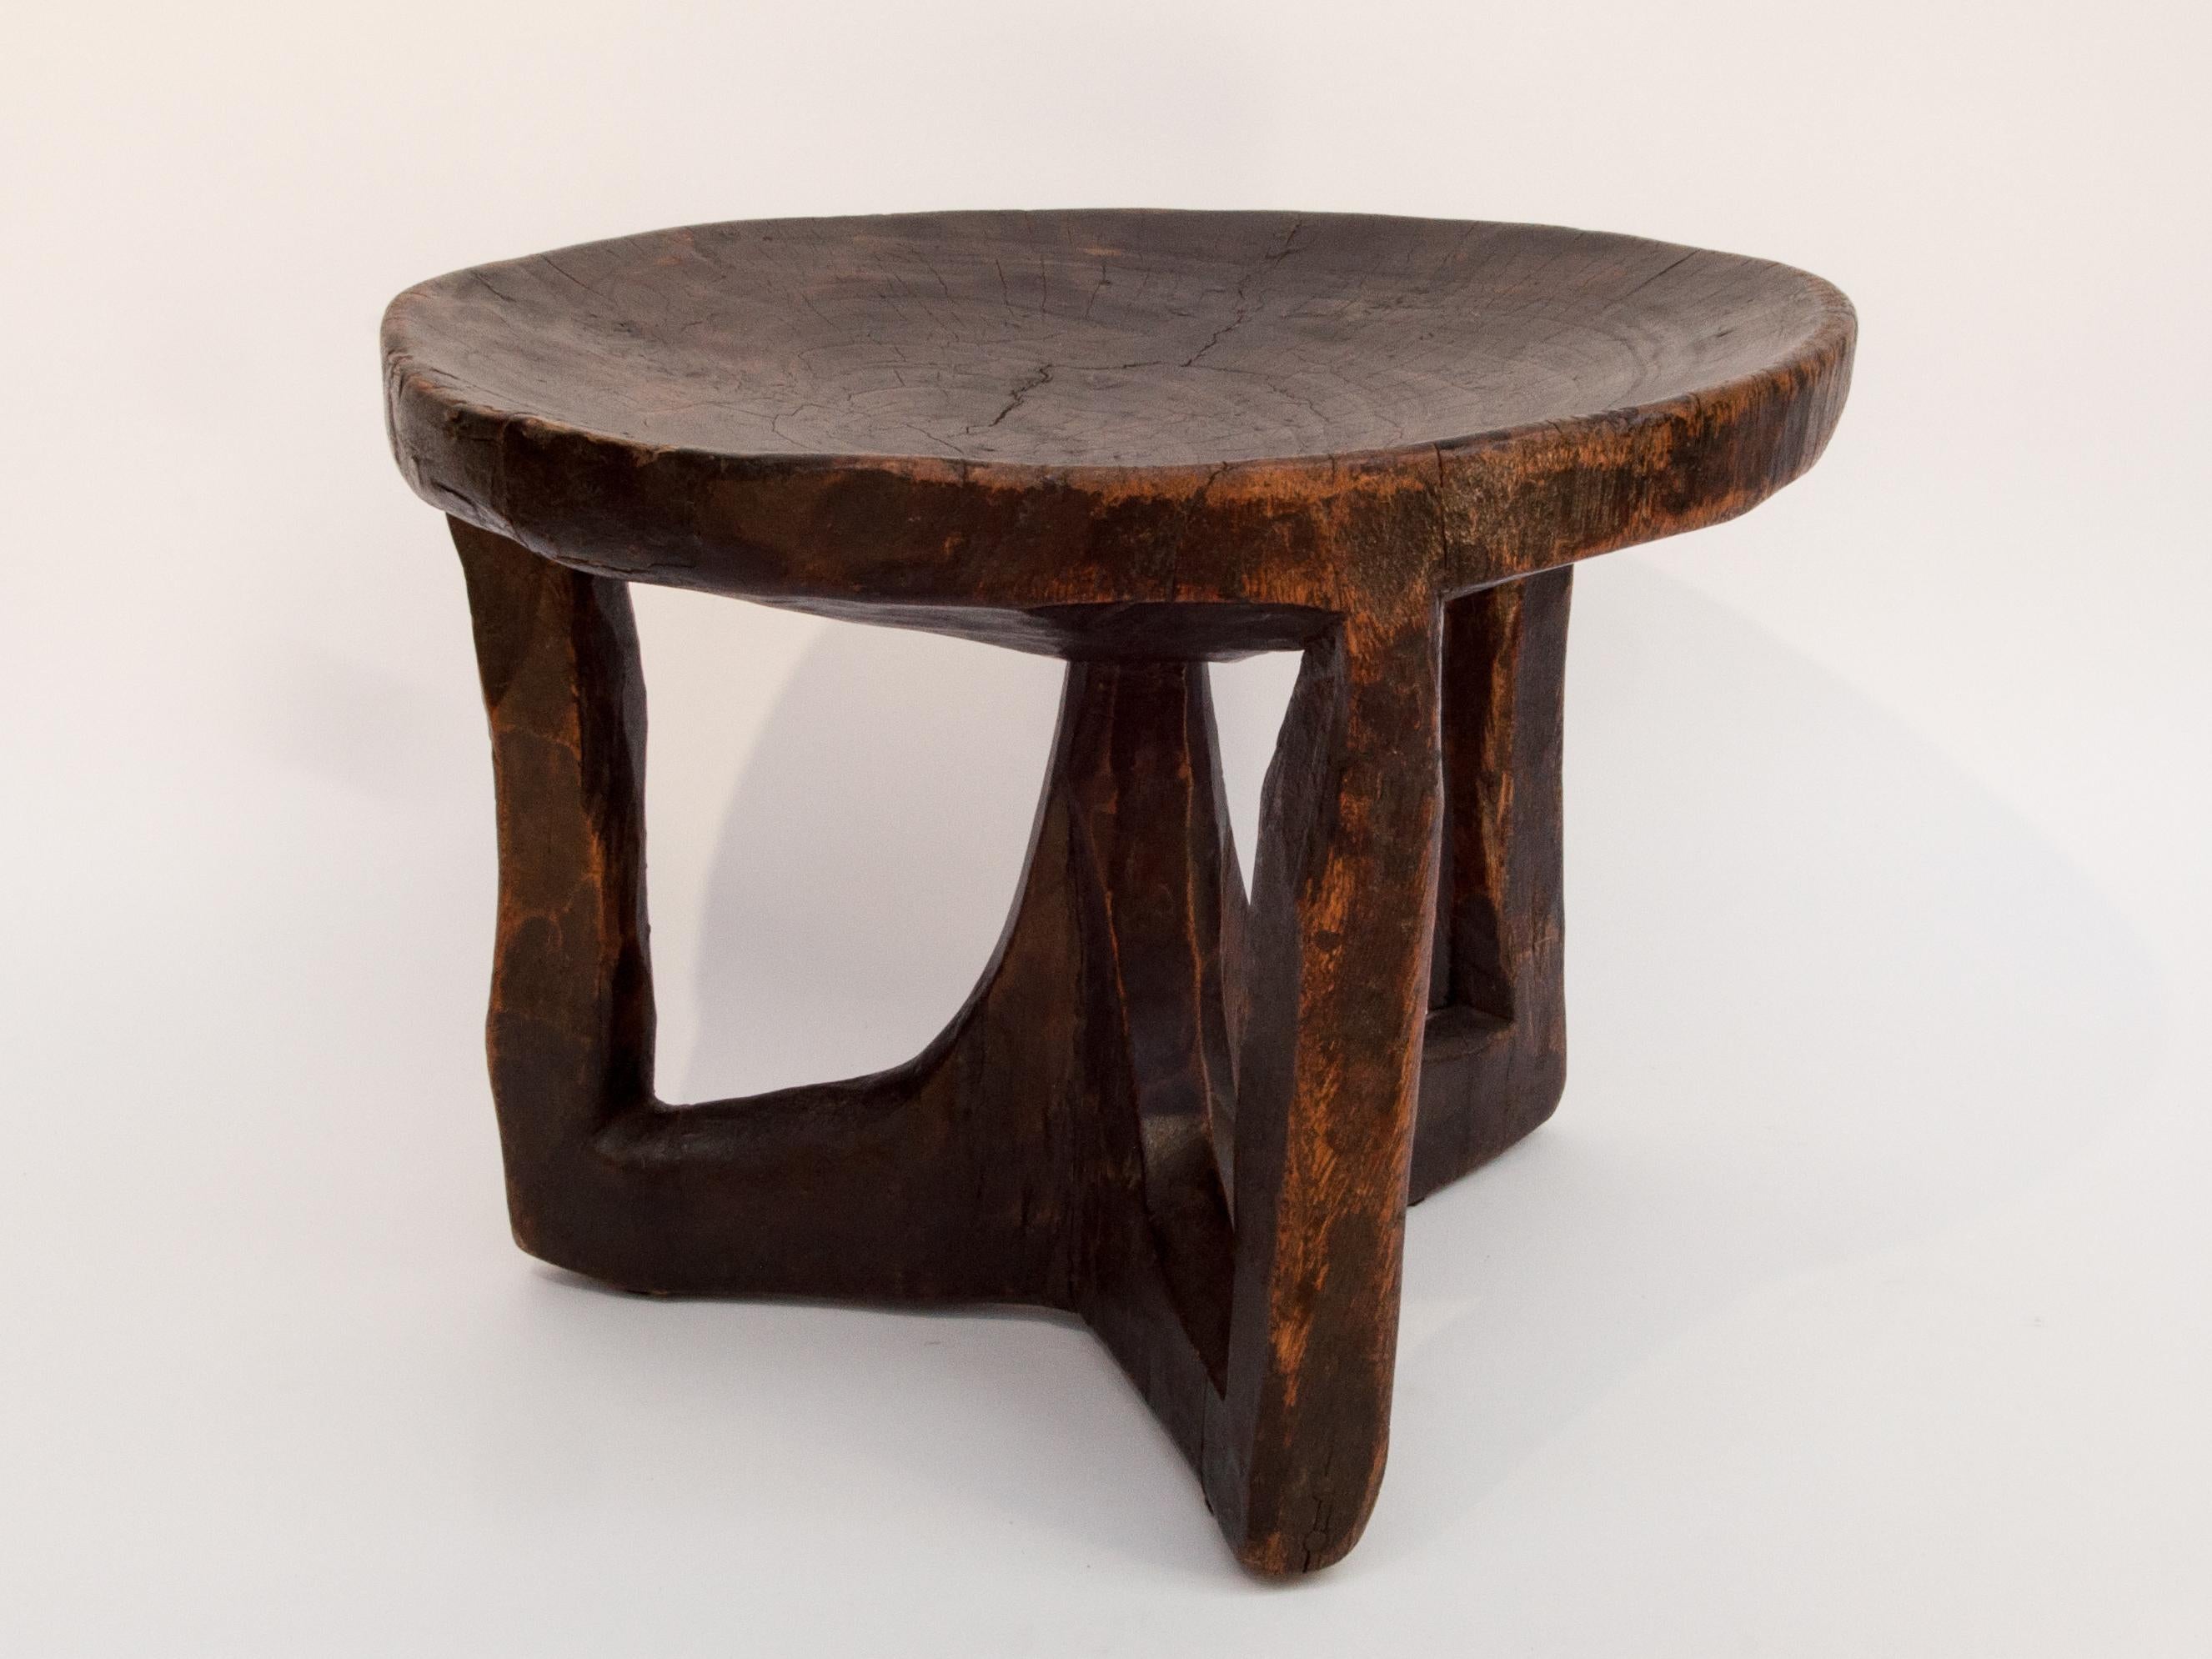 Ethiopian Short Tribal Wooden Stool, from Ethiopia, Mid-Late 20th Century